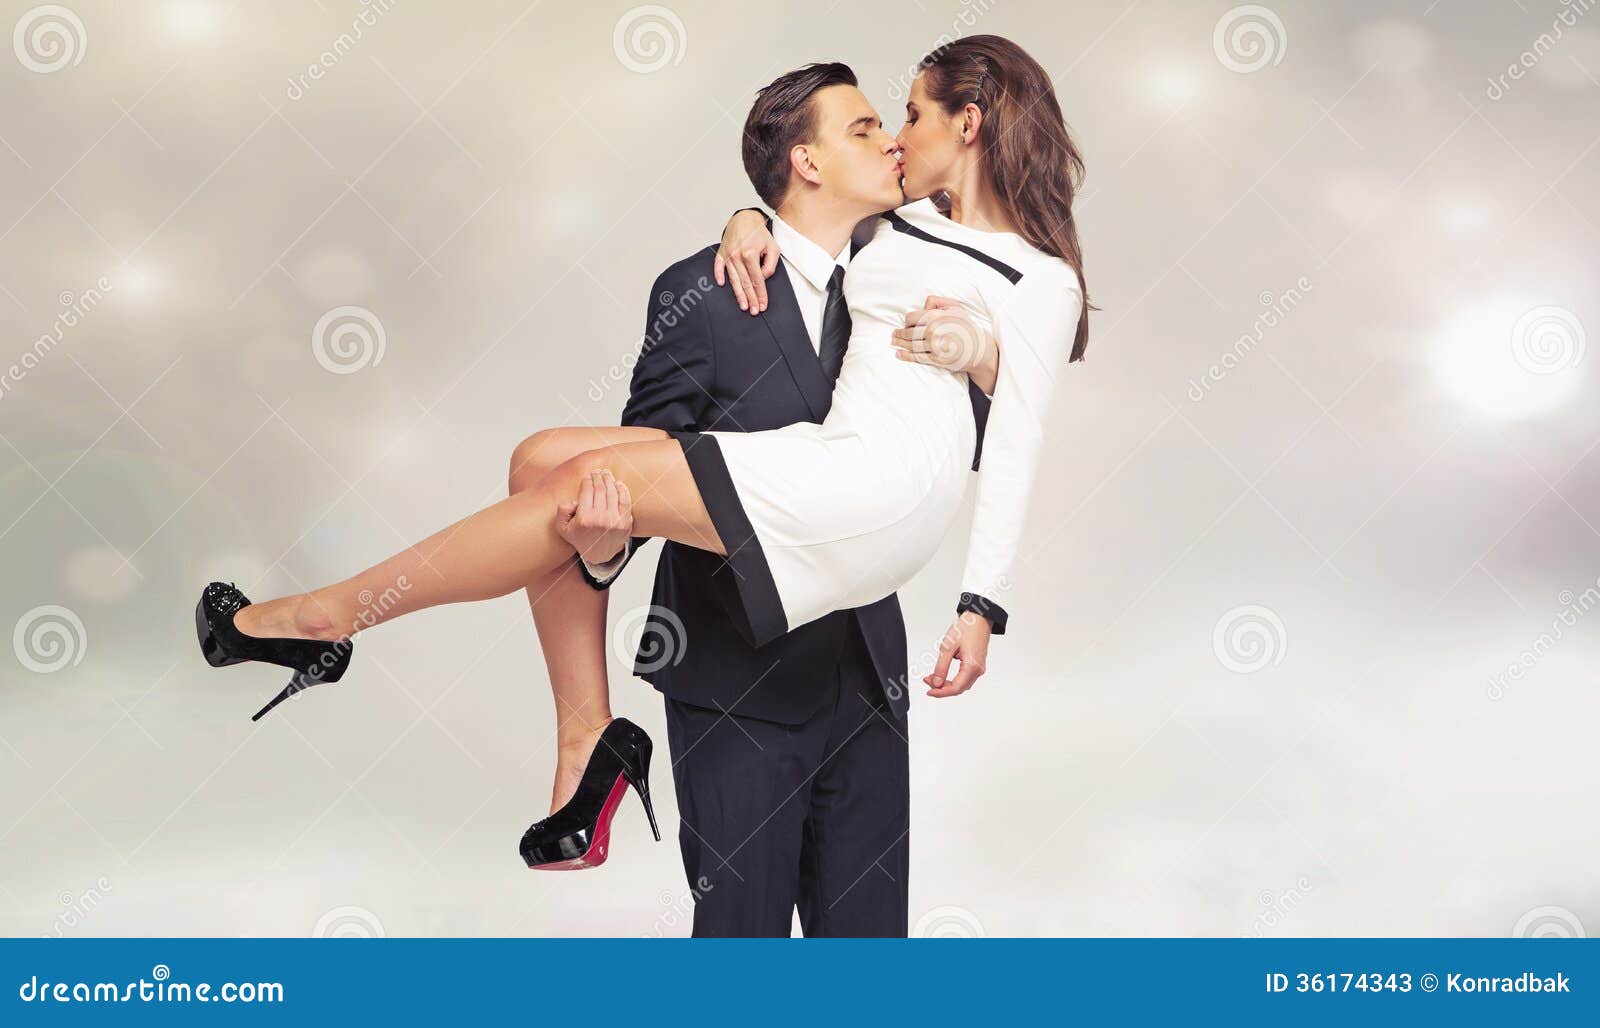 1352 Kissing Pose Stock Photos  Free  RoyaltyFree Stock Photos from  Dreamstime